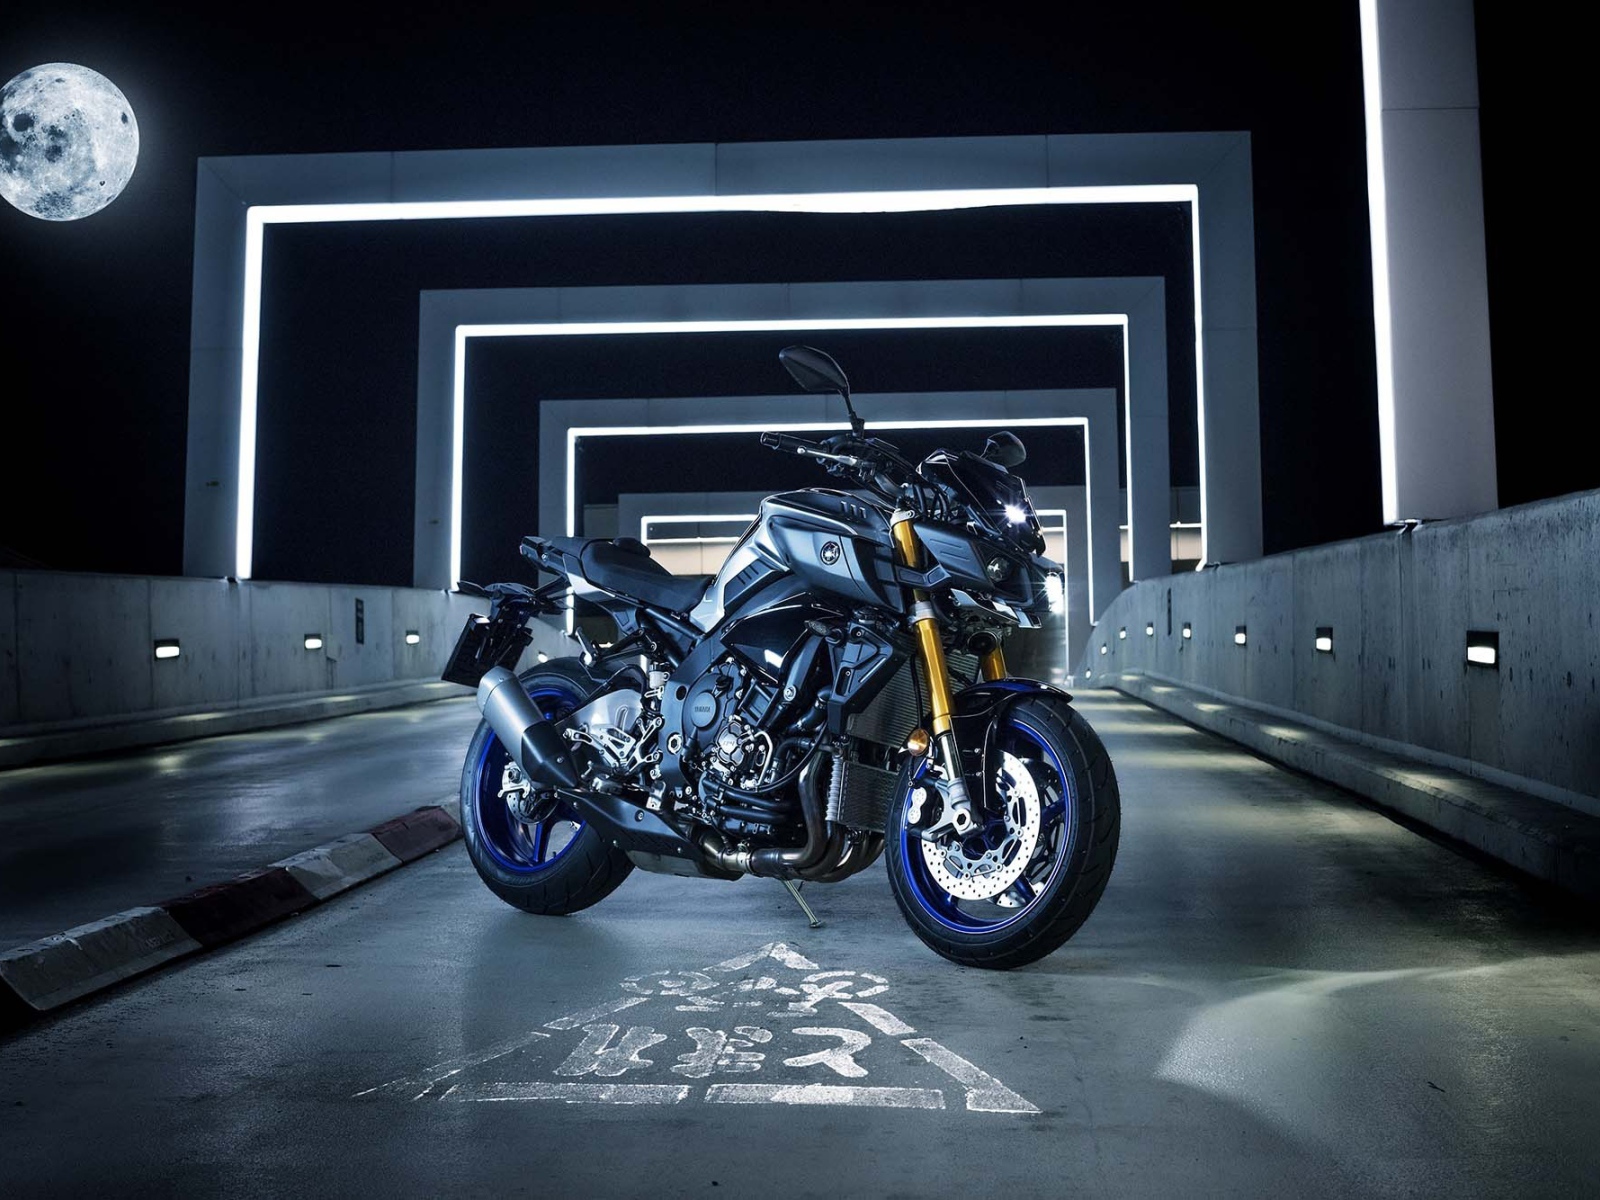 Motorcycle Yamaha MT-10 SP, 2017 in the light of the moon